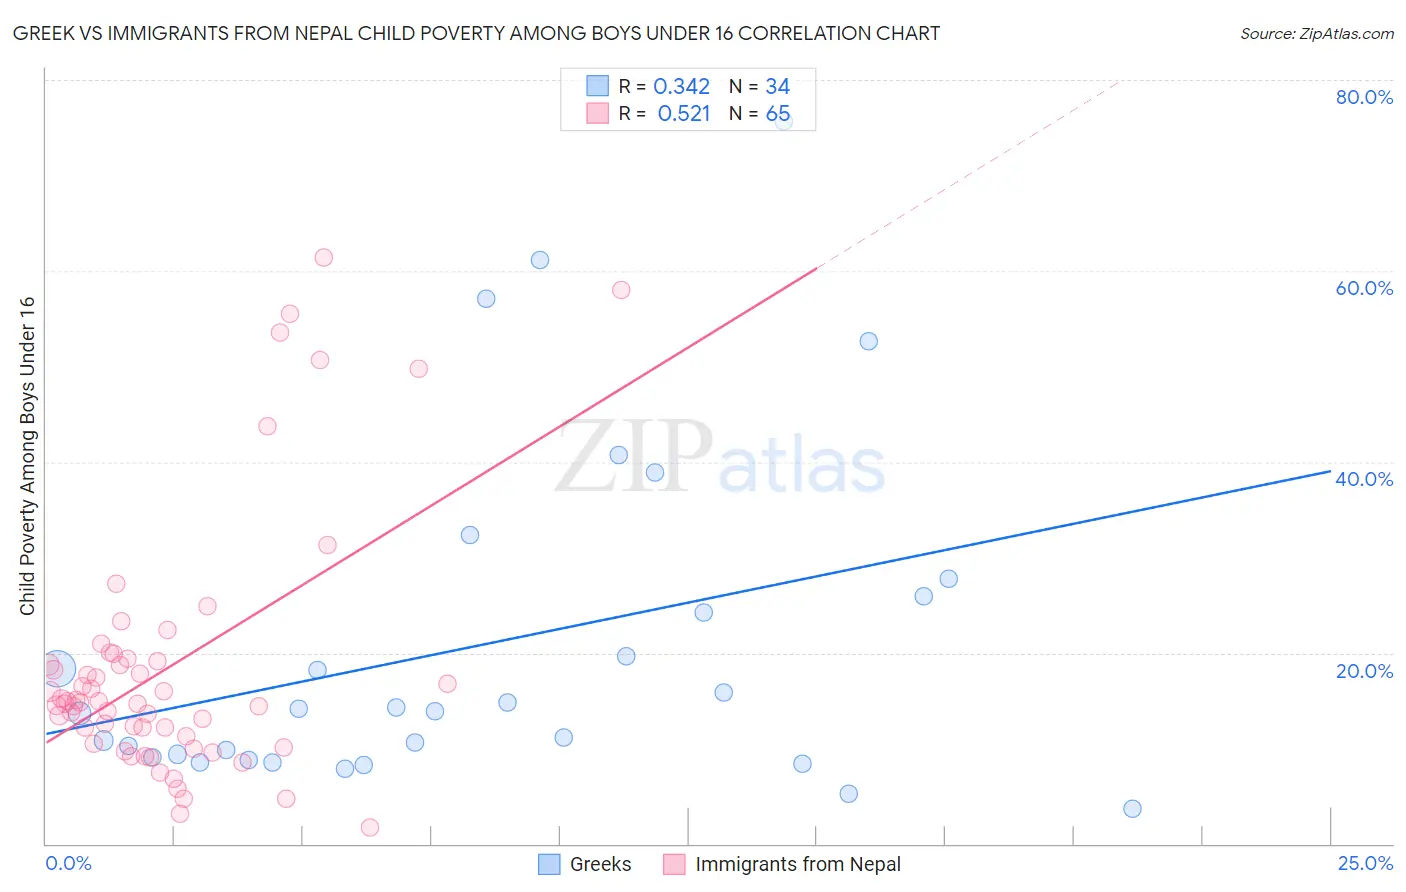 Greek vs Immigrants from Nepal Child Poverty Among Boys Under 16